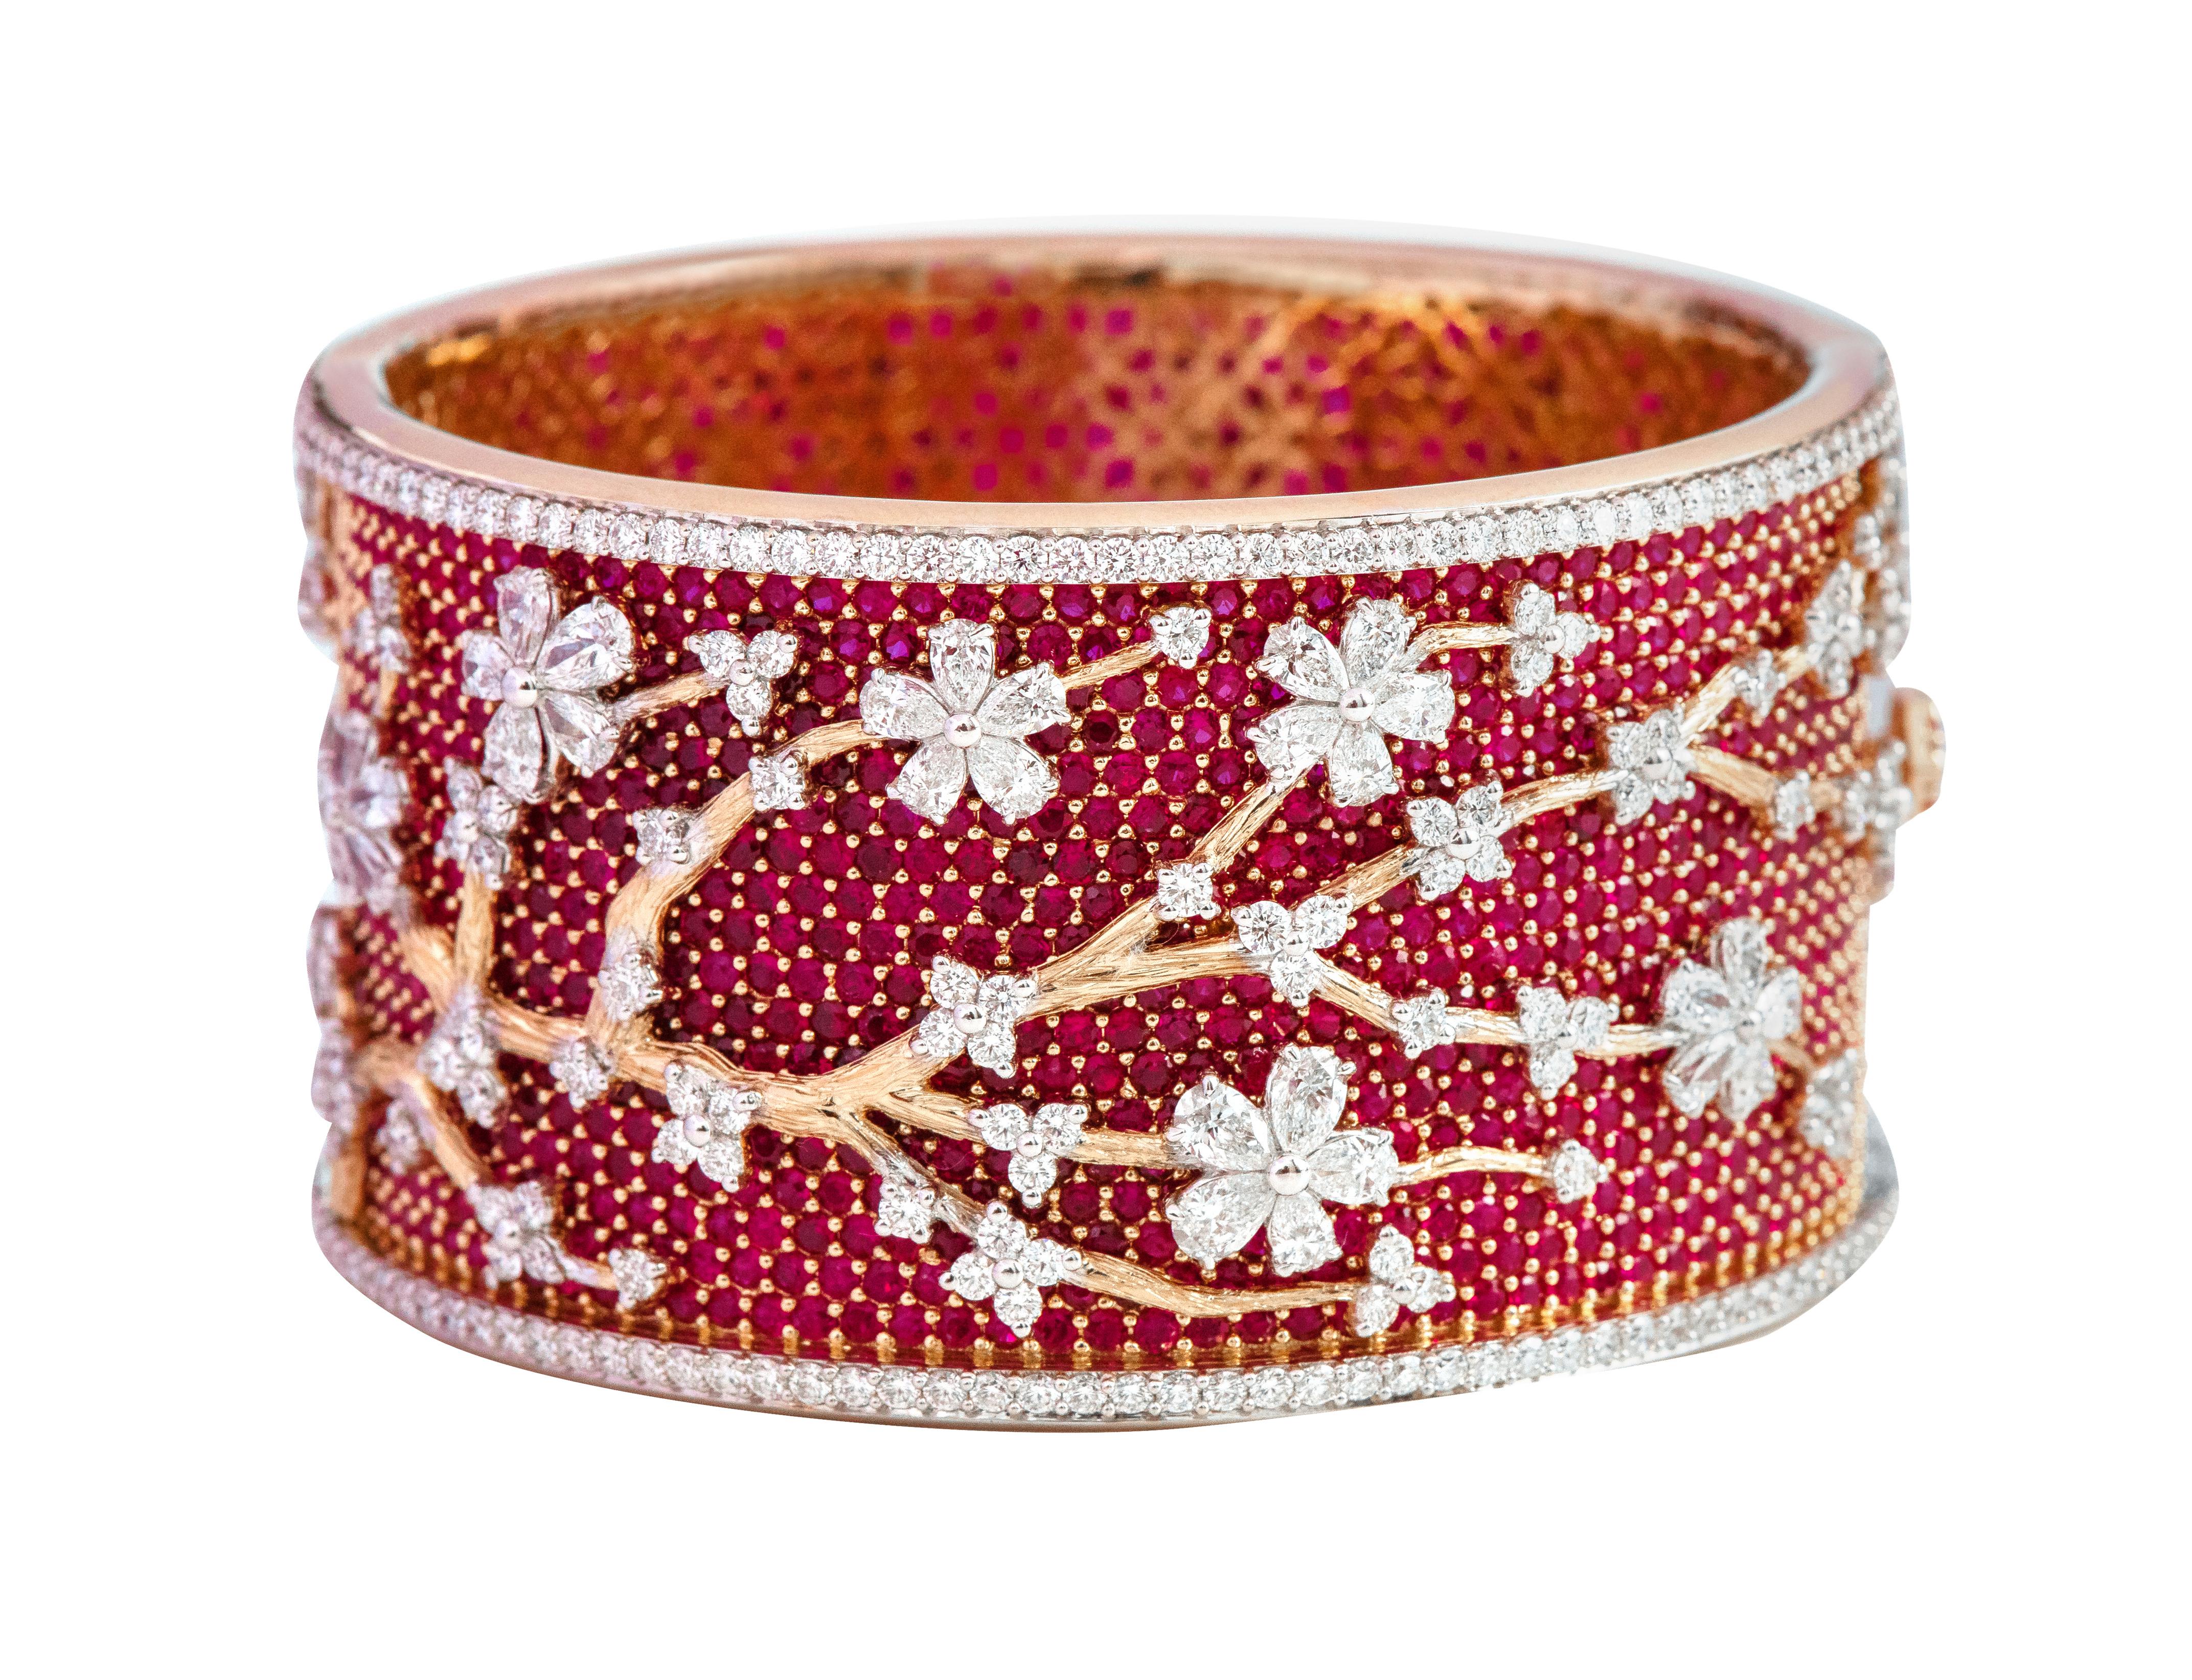 18 Karat Yellow Gold 49.80 Carats Ruby and Diamond Bangle in Contemporary Style 

This nouveau-style blood red ruby and diamond bangle is strikingly gorgeous. The pave set round ruby bed forms the intriguing base of the bangle with the hammered